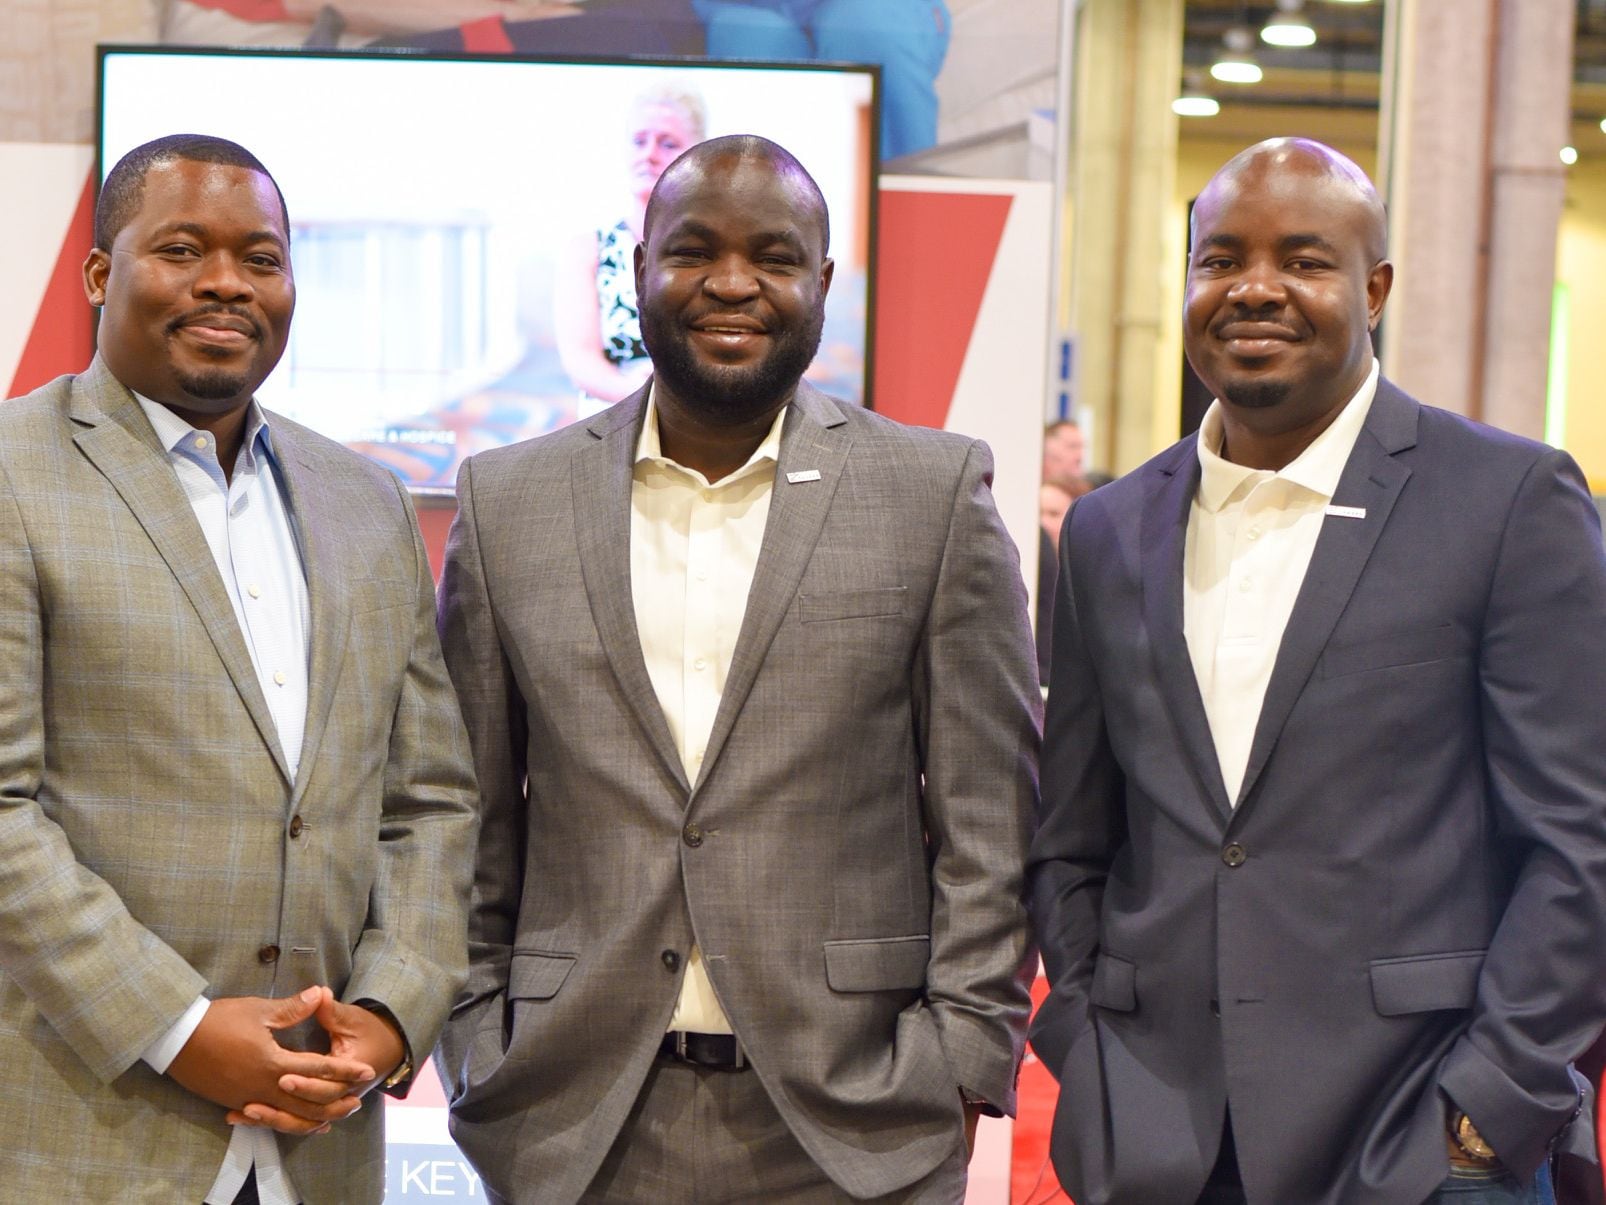 Axxess Technology is run by John Olajide (center) and his minority partners Andrew Olowu (left) and Ron Olajide.